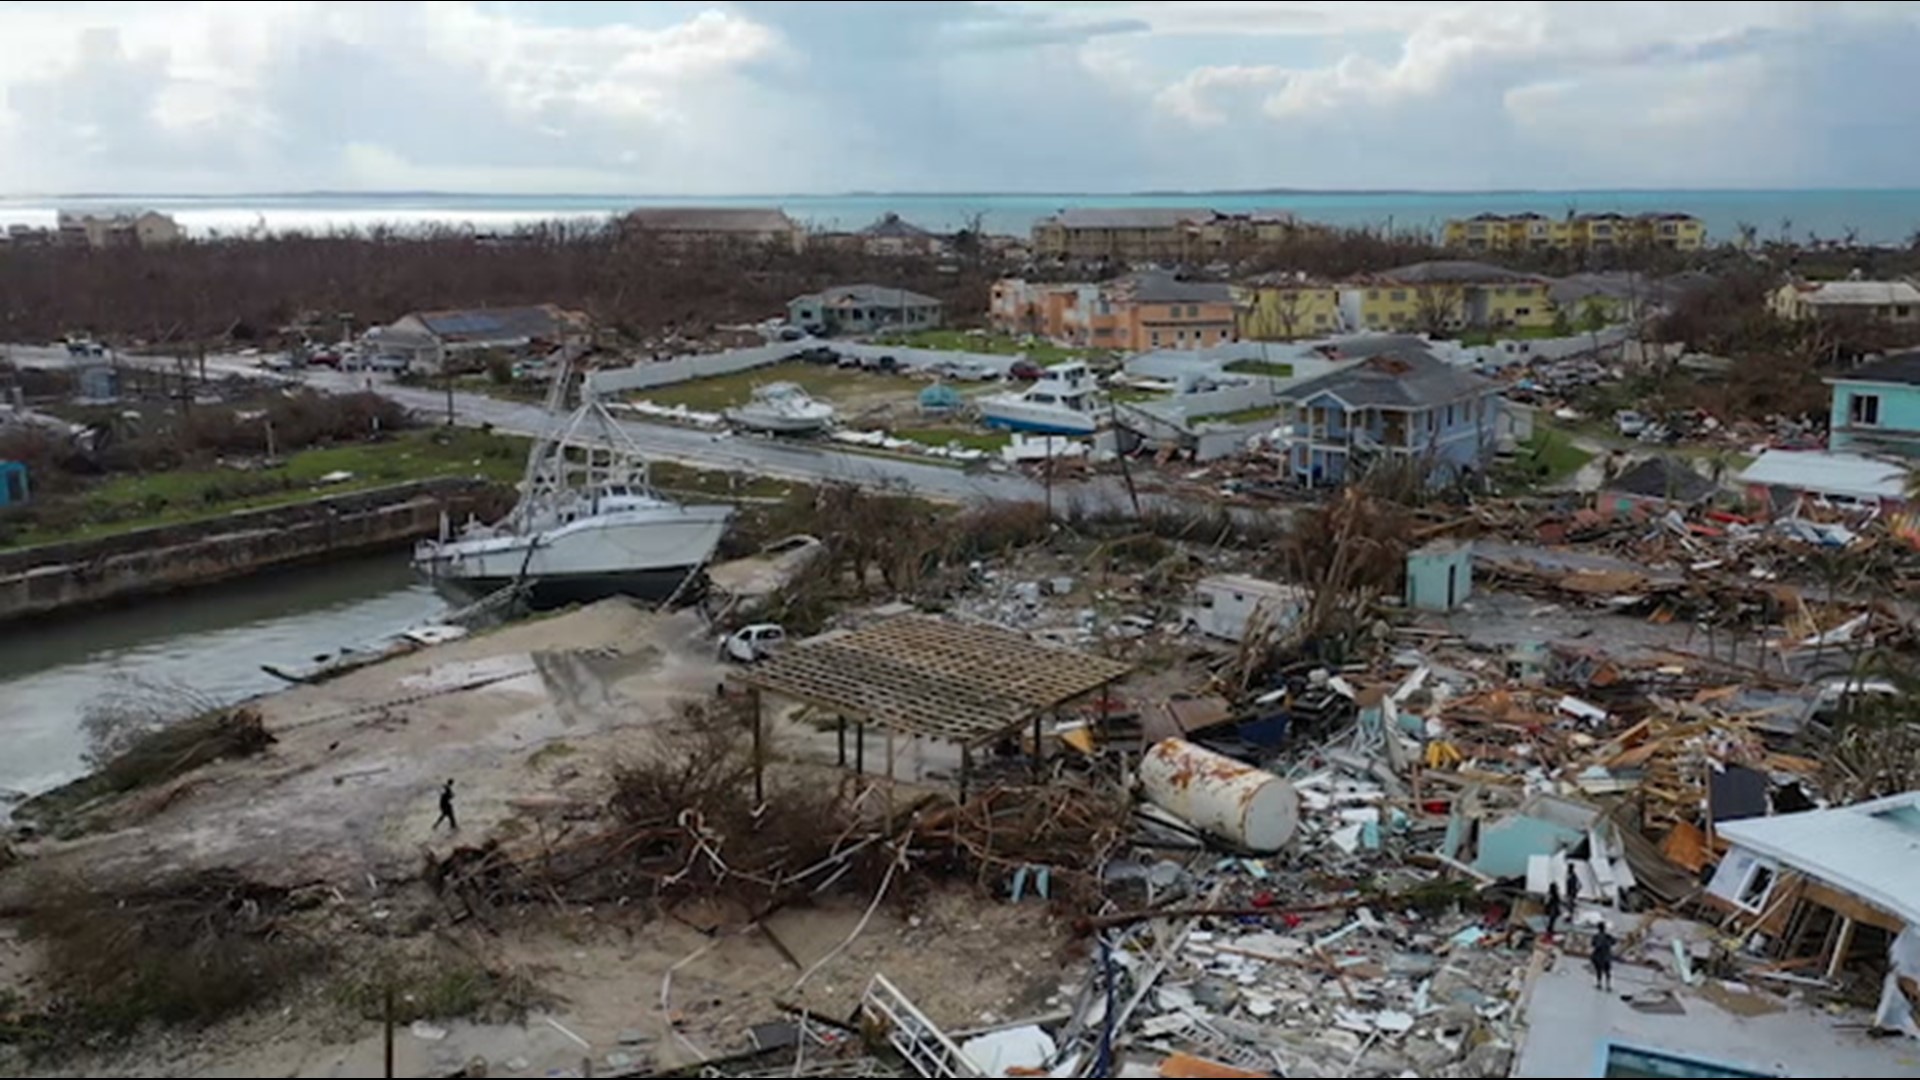 A year has passed since the Bahamas were devastated by Hurricane Dorian. Now, recovery efforts continue under the shadow of a global pandemic. AccuWeather spoke with Abaconians about the last year, and their road forward.